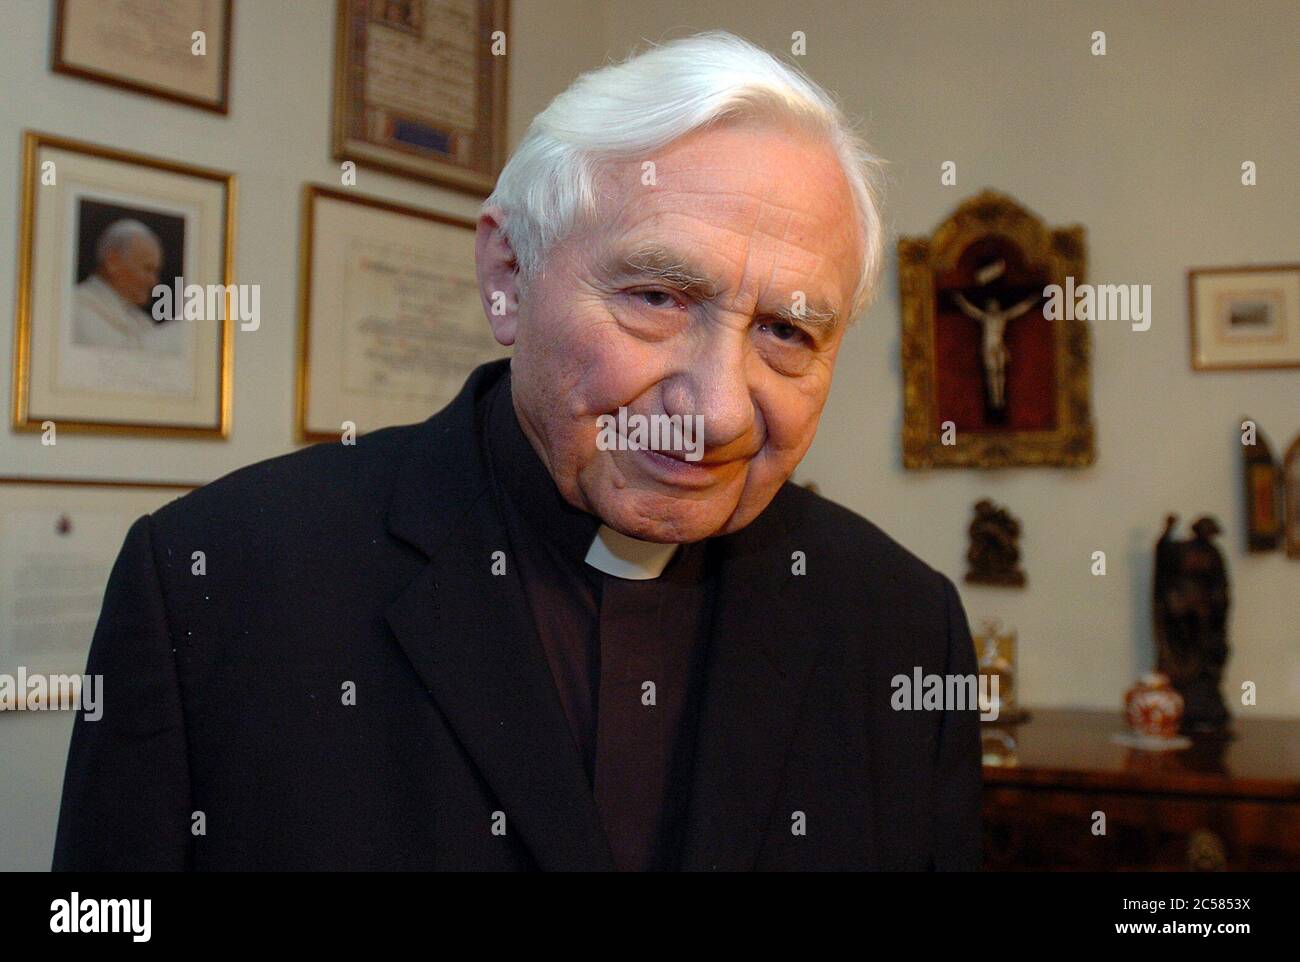 Georg Ratzinger will be in his house in Regensburg, Upper Palatinate, on Tuesday (April 19, 2005). Until the end, Georg Ratzinger was convinced that his brother Joseph, who was three years his junior, would not succeed John Paul II. But the tension was clearly written on the face of the long-time director of the world-famous Regensburg Cathedral Sparrows. Before the Second World War, both brothers attended the Archbishop's seminary in Traunstein, the 'cadre smithy' for aspiring priests. Both studied theology, both were ordained priests on June 29, 1951 in Freising. Photo: Armin Weigel dpa/lb Stock Photo